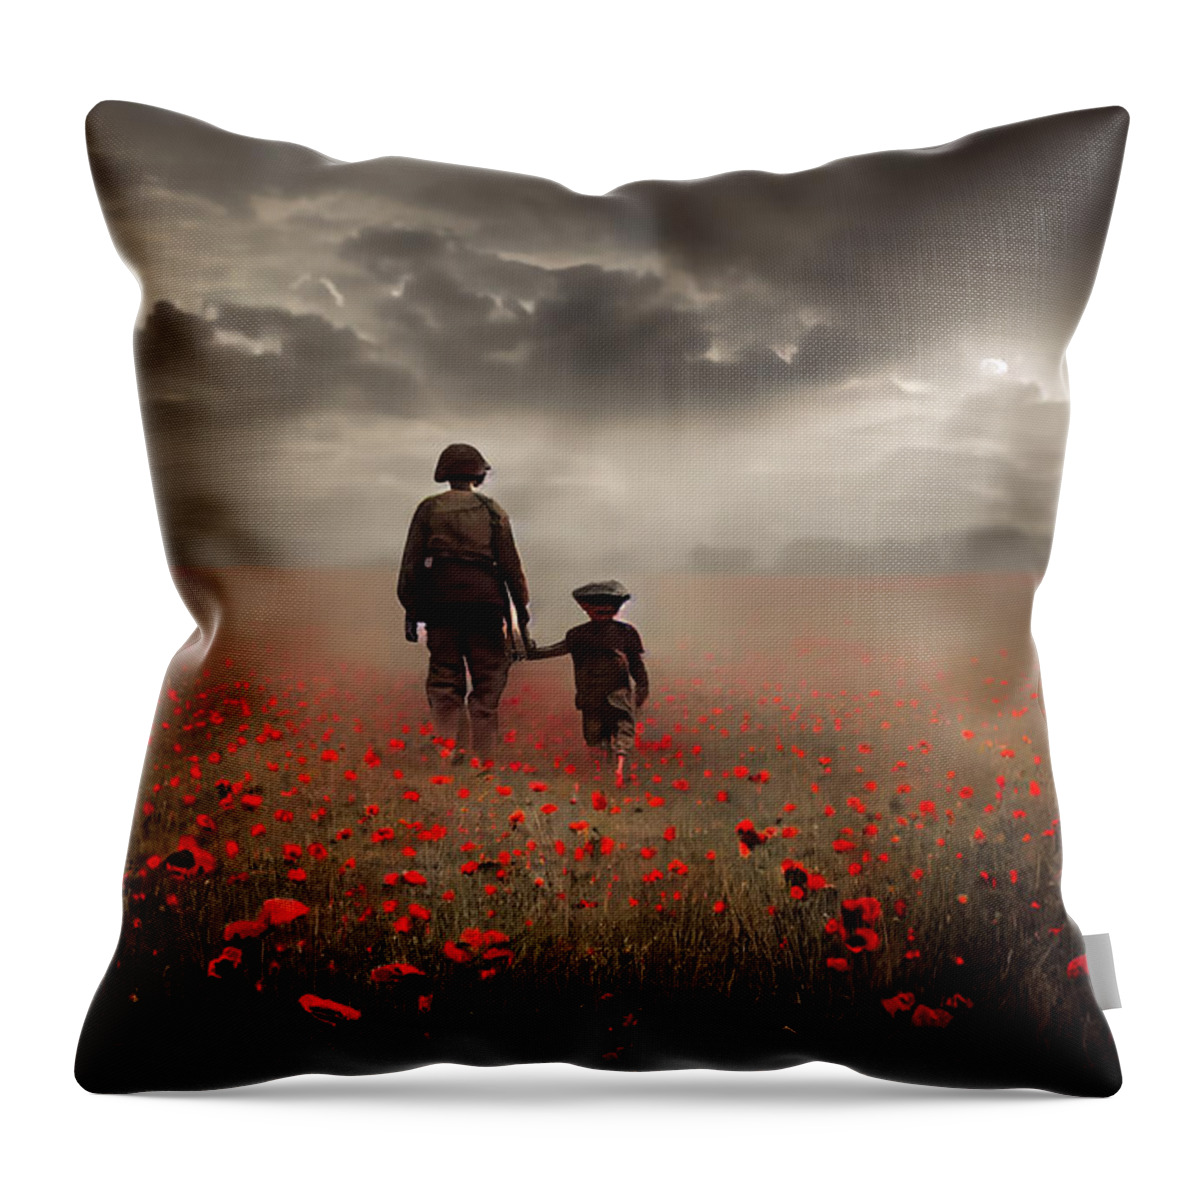 Soldier Throw Pillow featuring the digital art Take My Hand by Airpower Art